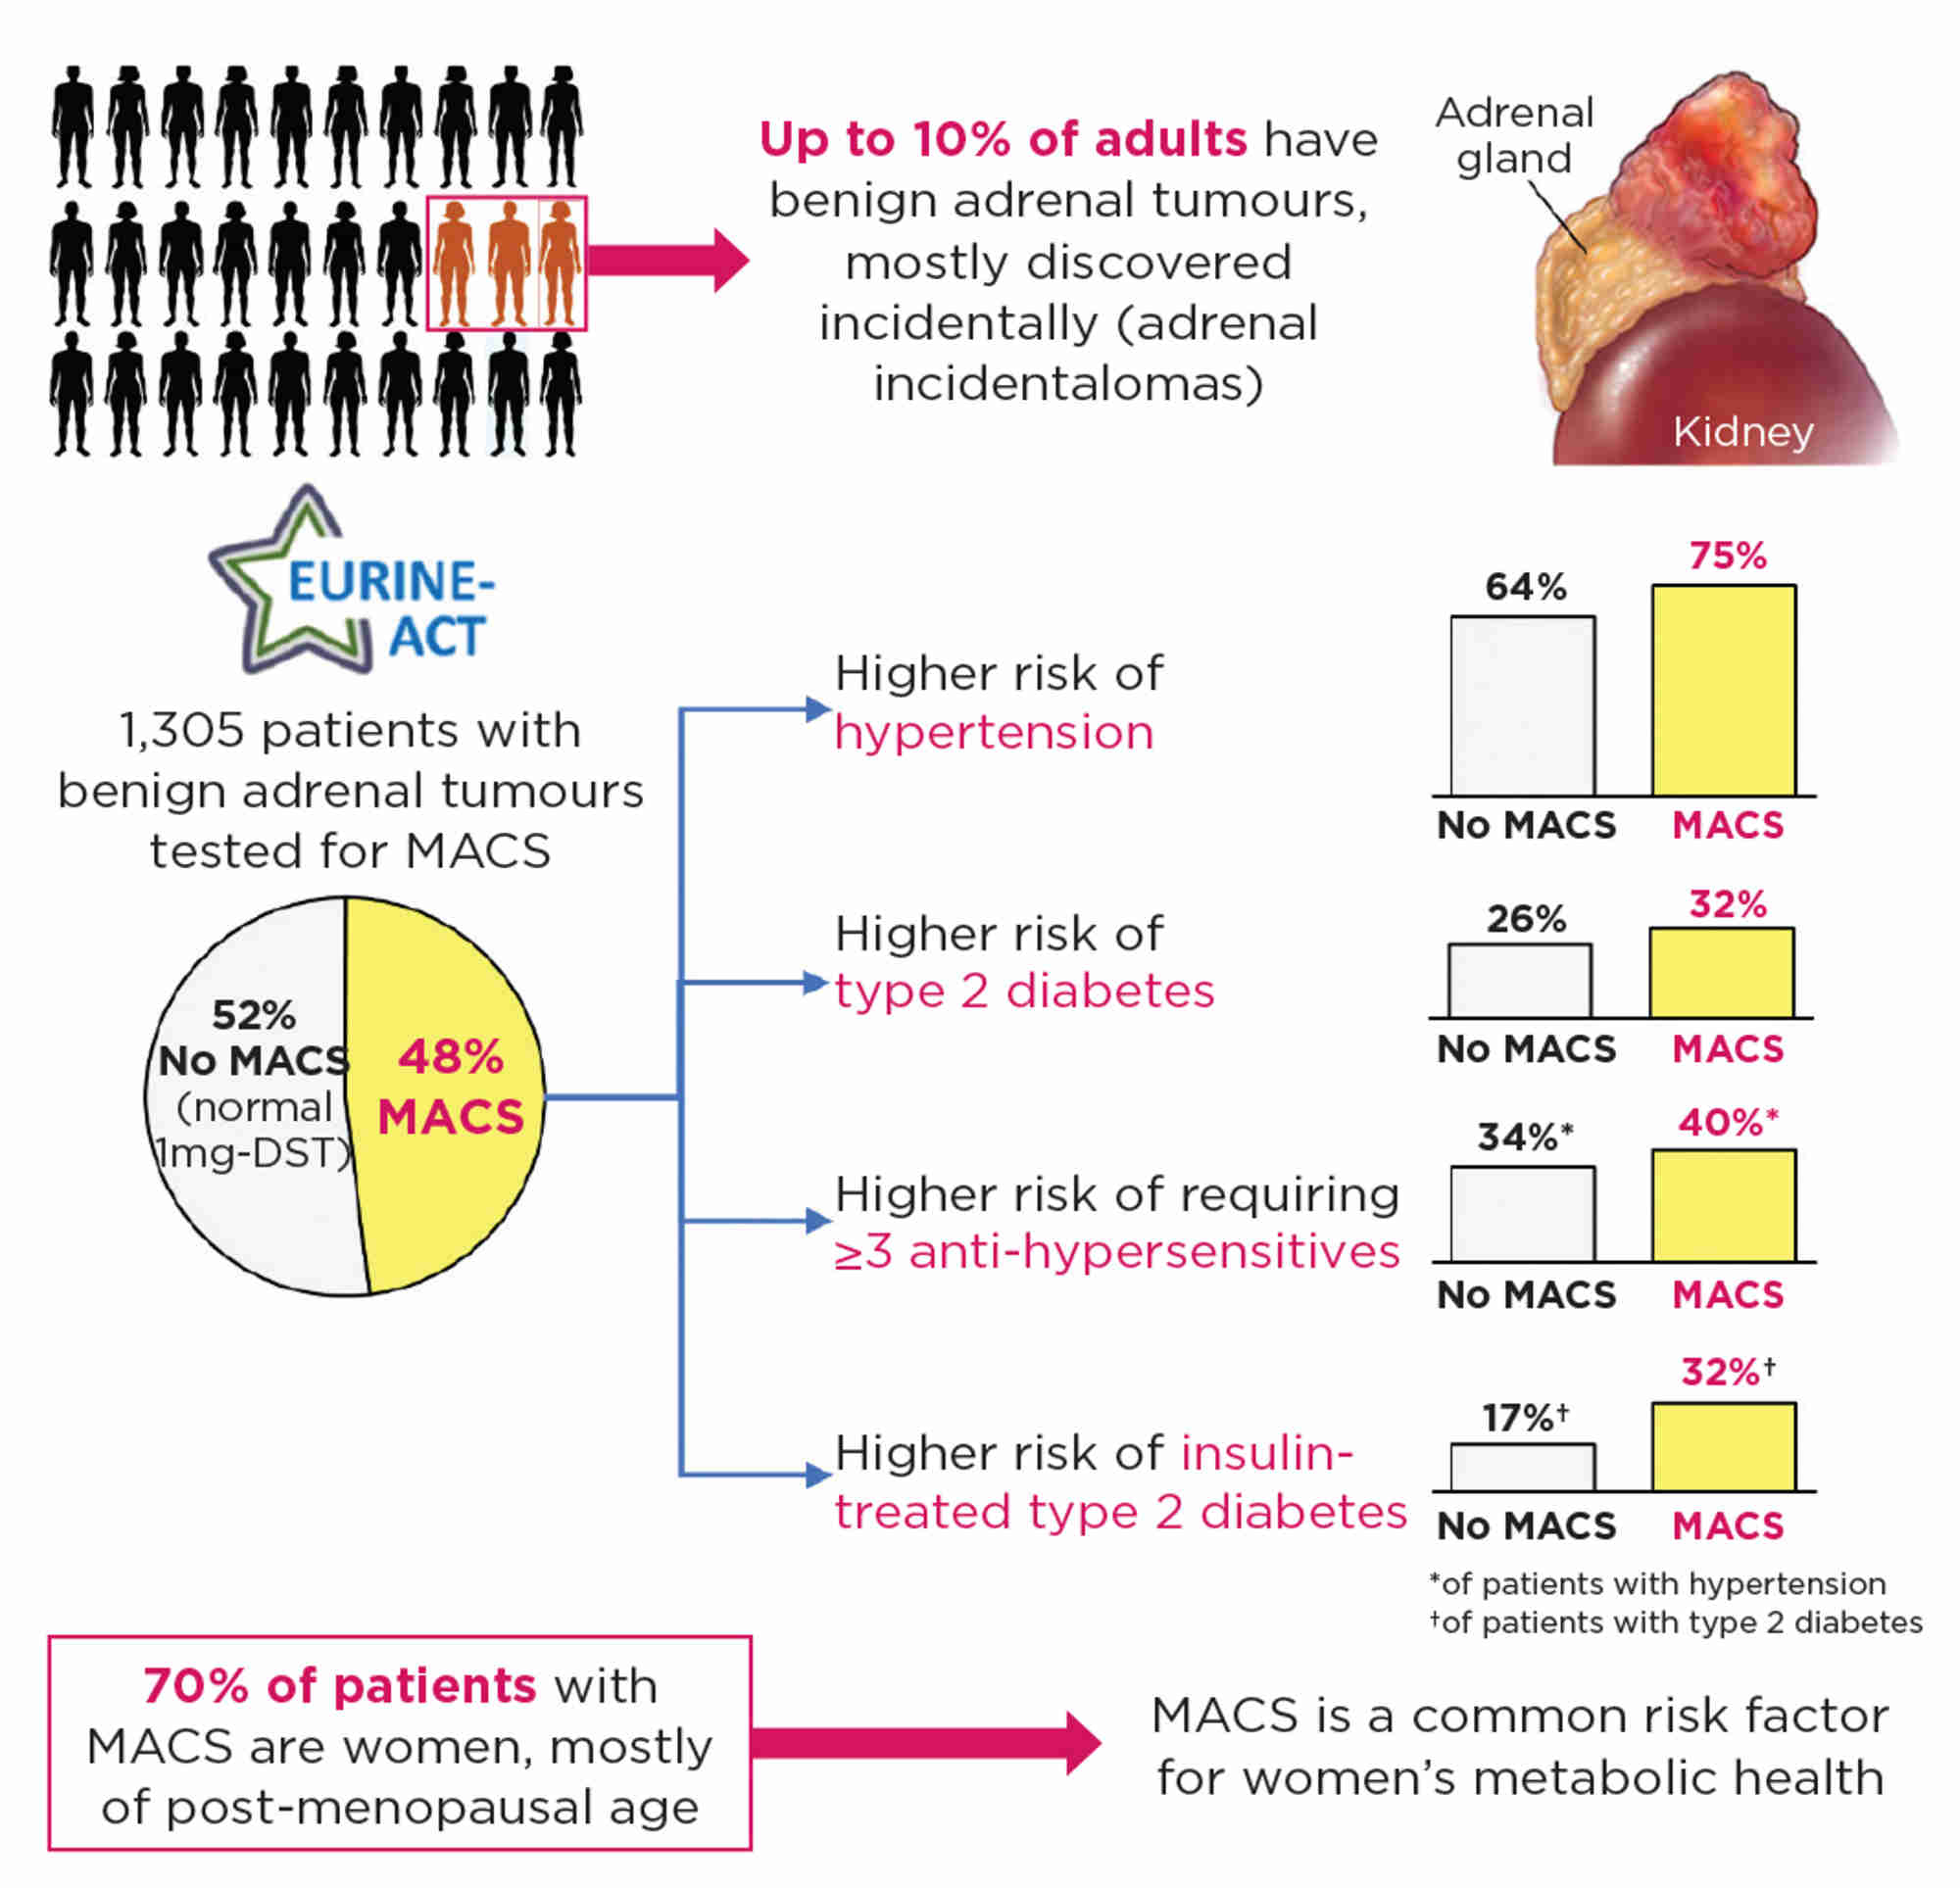 Figure. All patients with newly diagnosed adrenal tumours should undergo a 1mg-DST to screen for MACS. In the EURINE-ACT Study, 1,305 patients with benign adrenal tumours (incidentally discovered in 1,240) underwent a 1mg-DST. 48% of patients with adrenal incidentalomas had abnormal 1mg-DST results. Patients with MACS were more likely to be post-menopausal women and carried a higher cardiometabolic risk than those with normal 1mg-DST results.